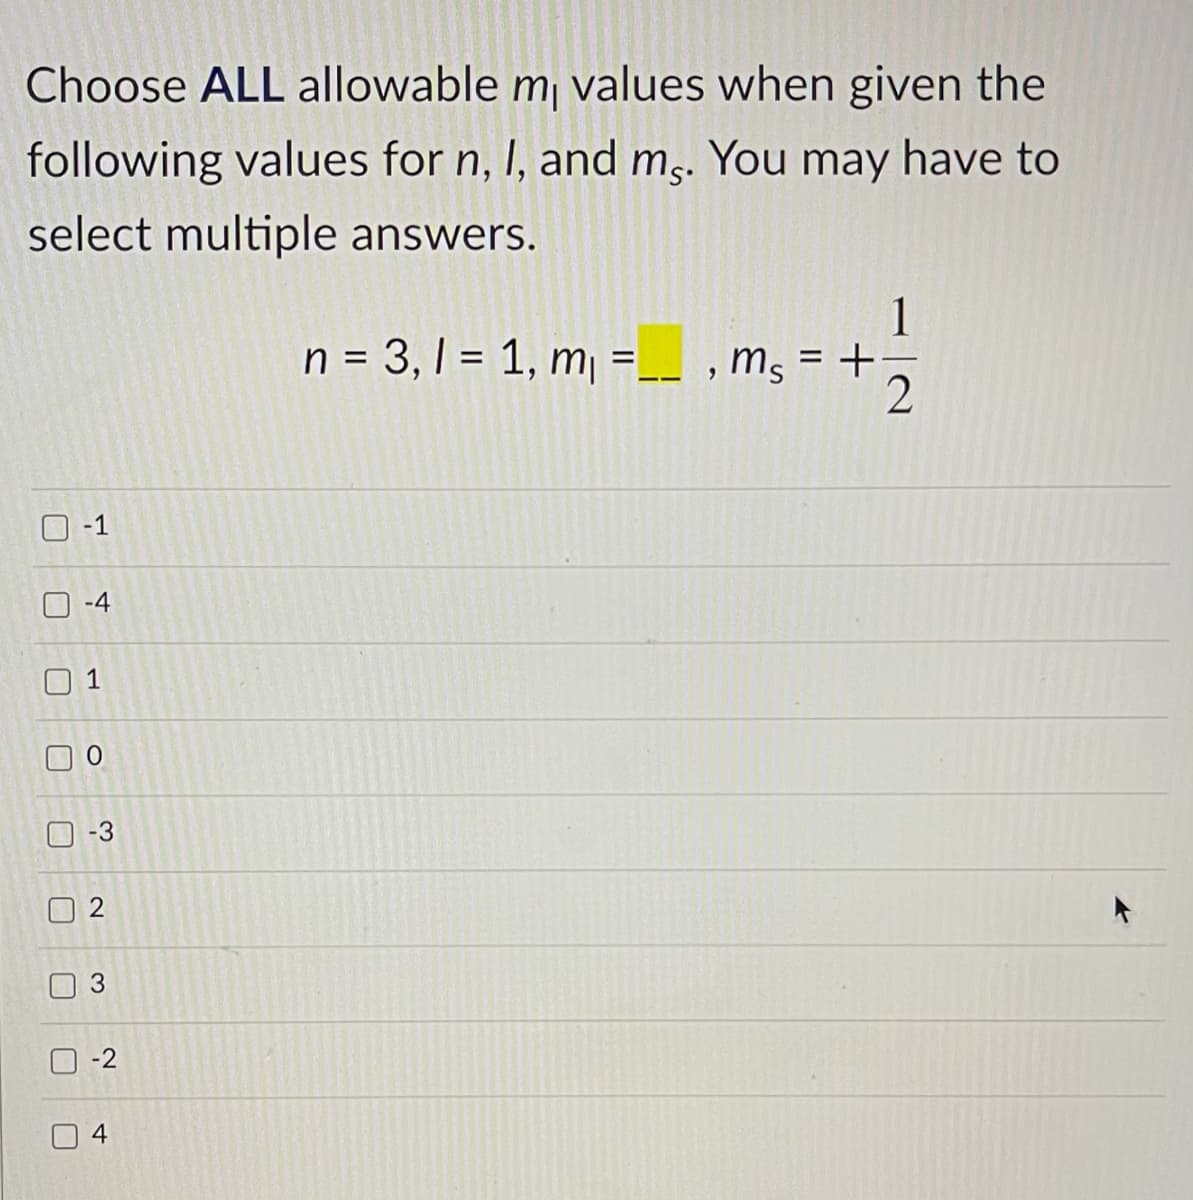 Choose ALL allowable m values when given the
following values for n, I, and m,. You may have to
select multiple answers.
1
n = 3,1 = 1, m =__ , ms = +
-1
-4
1
-3
2
3.
-2
